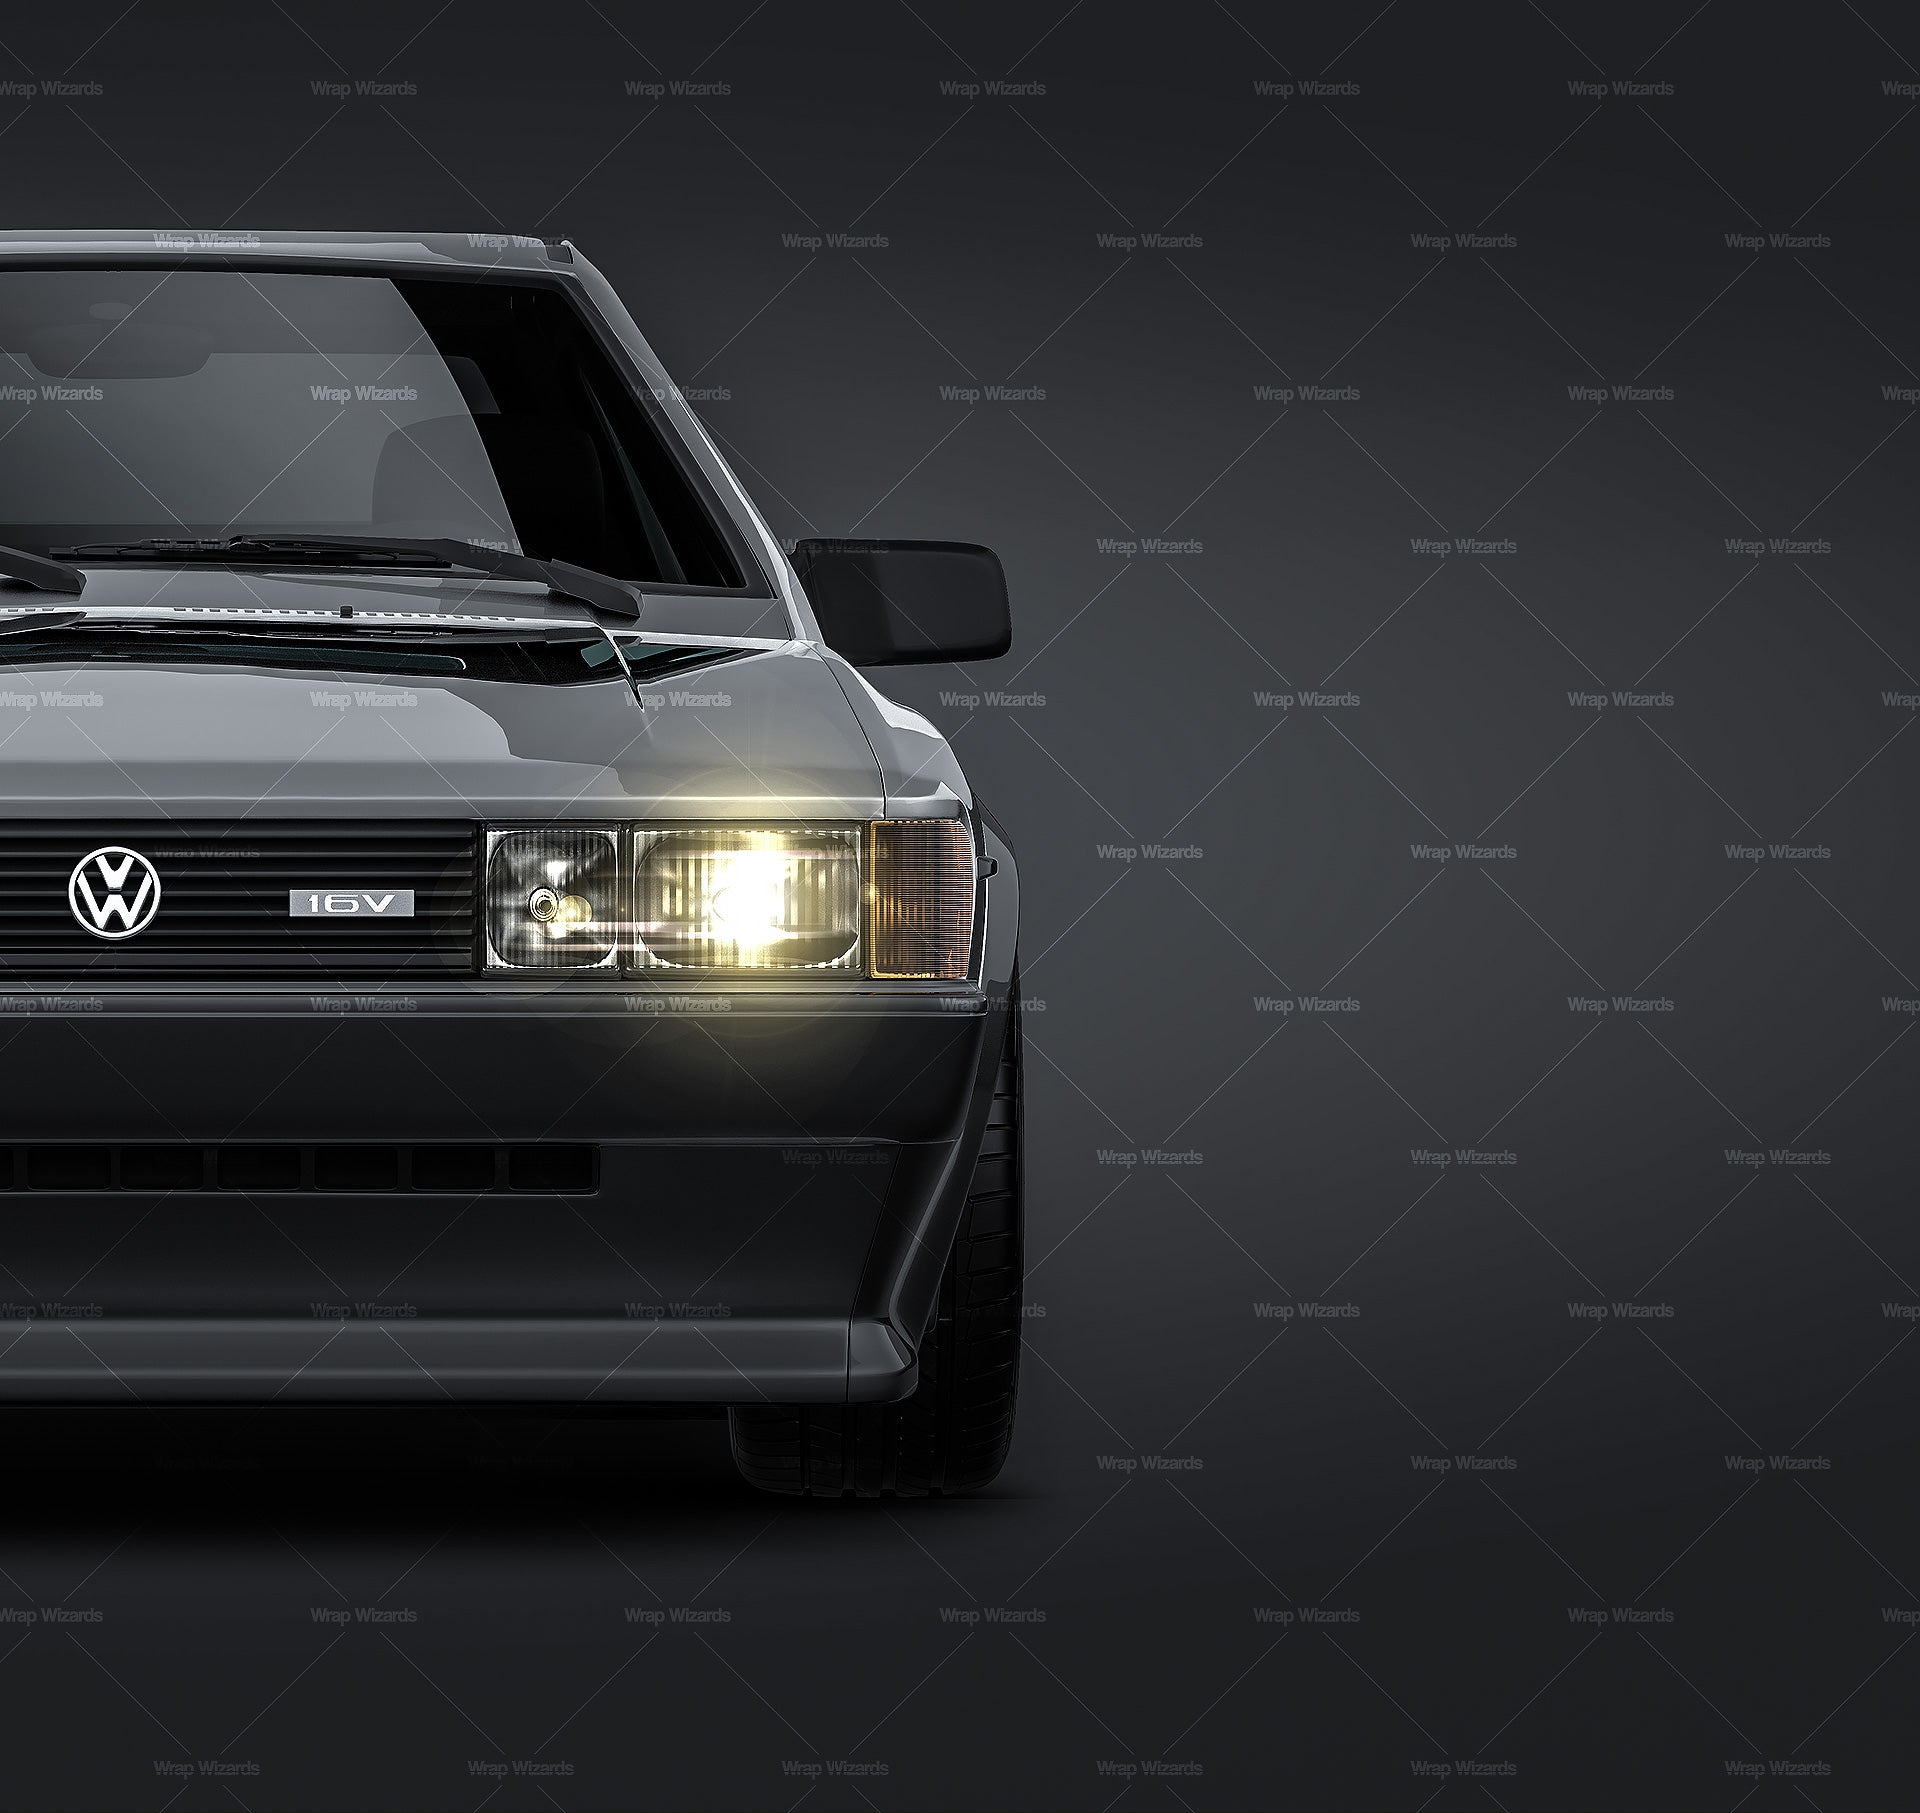 Volkswagen Scirocco MK2 1987 glossy finish - all sides Car Mockup Template.psd